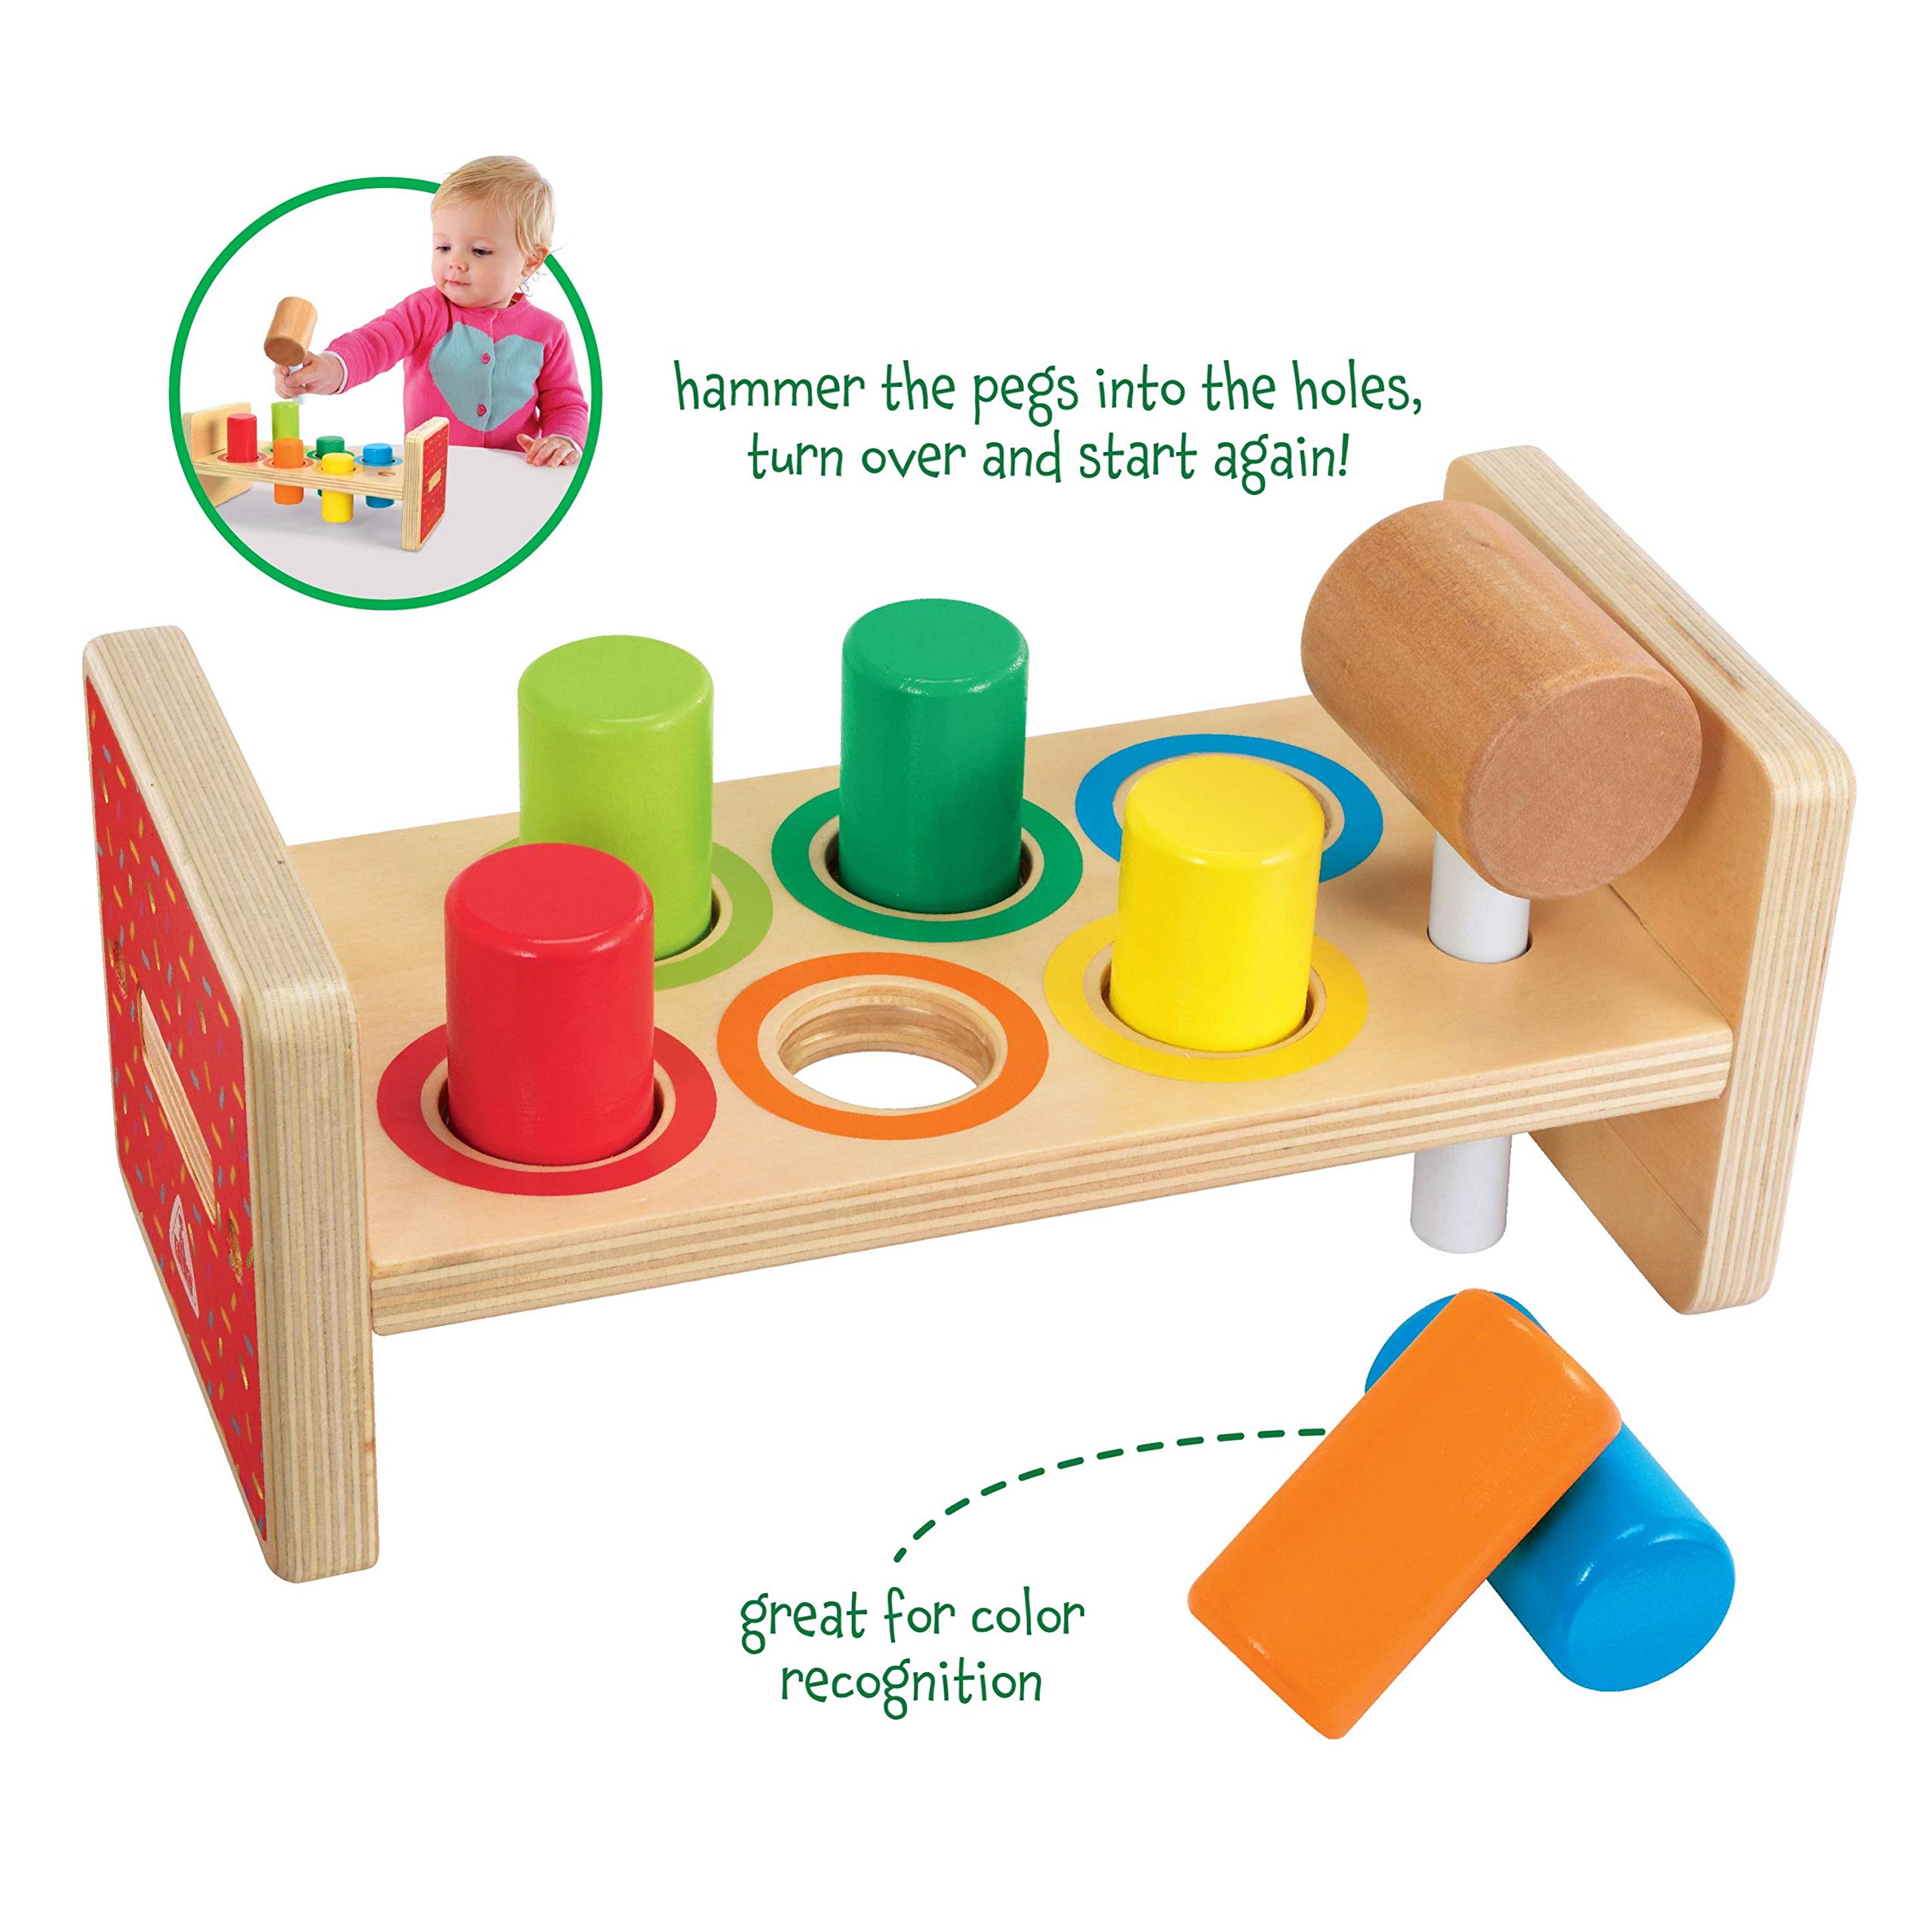 Early Learning Centre Wooden Hammer Bench, Hand Eye Coordination, Stimulates Senses,, Kids Toys for Ages 18 Month, Gifts and Presents, Amazon Exclusive